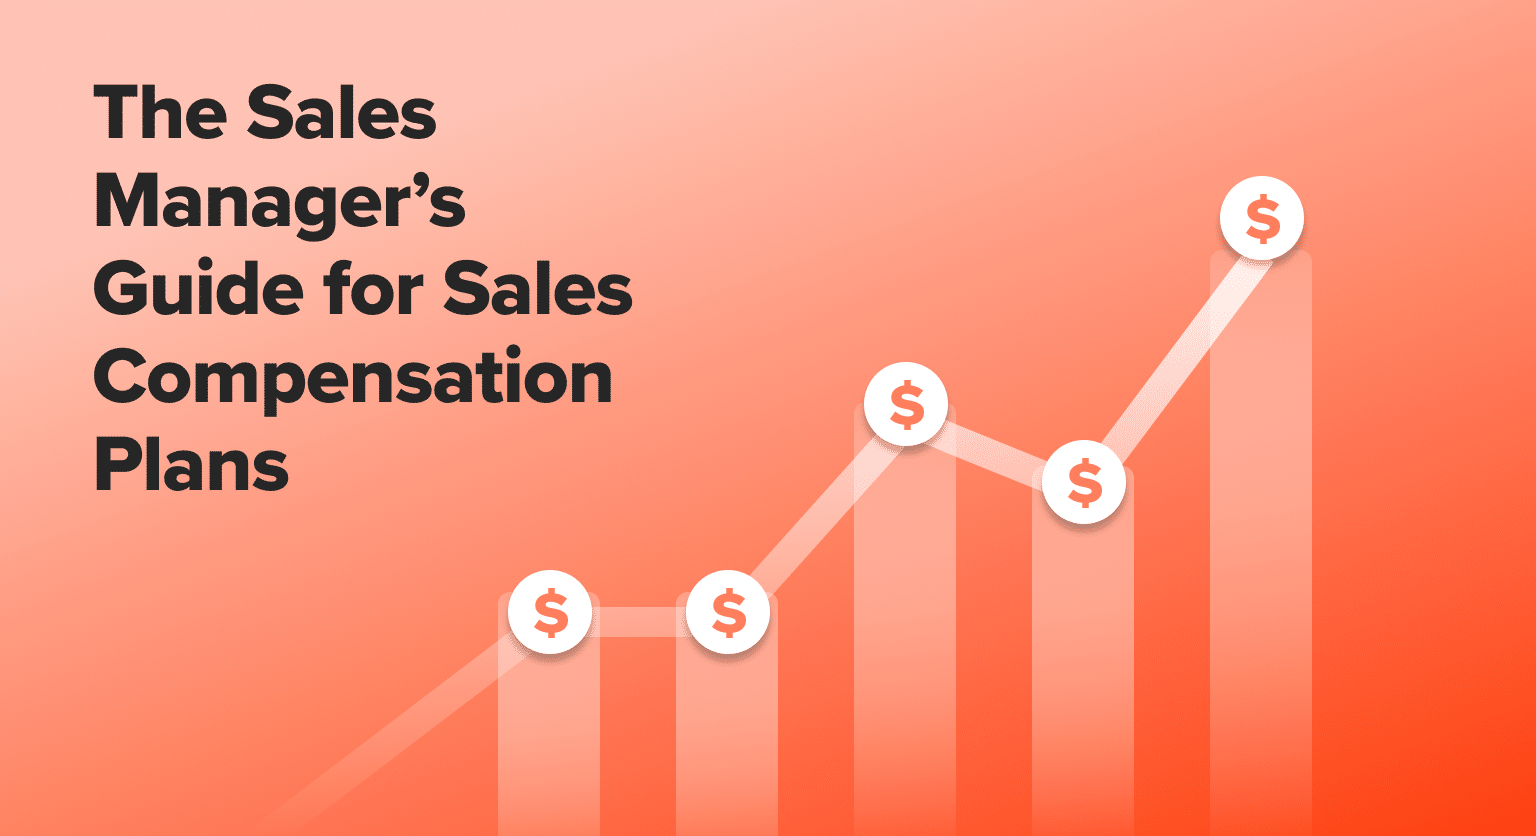 Sales　The　Coefficient　Guide　Sales　Manager's　Plans　for　Compensation